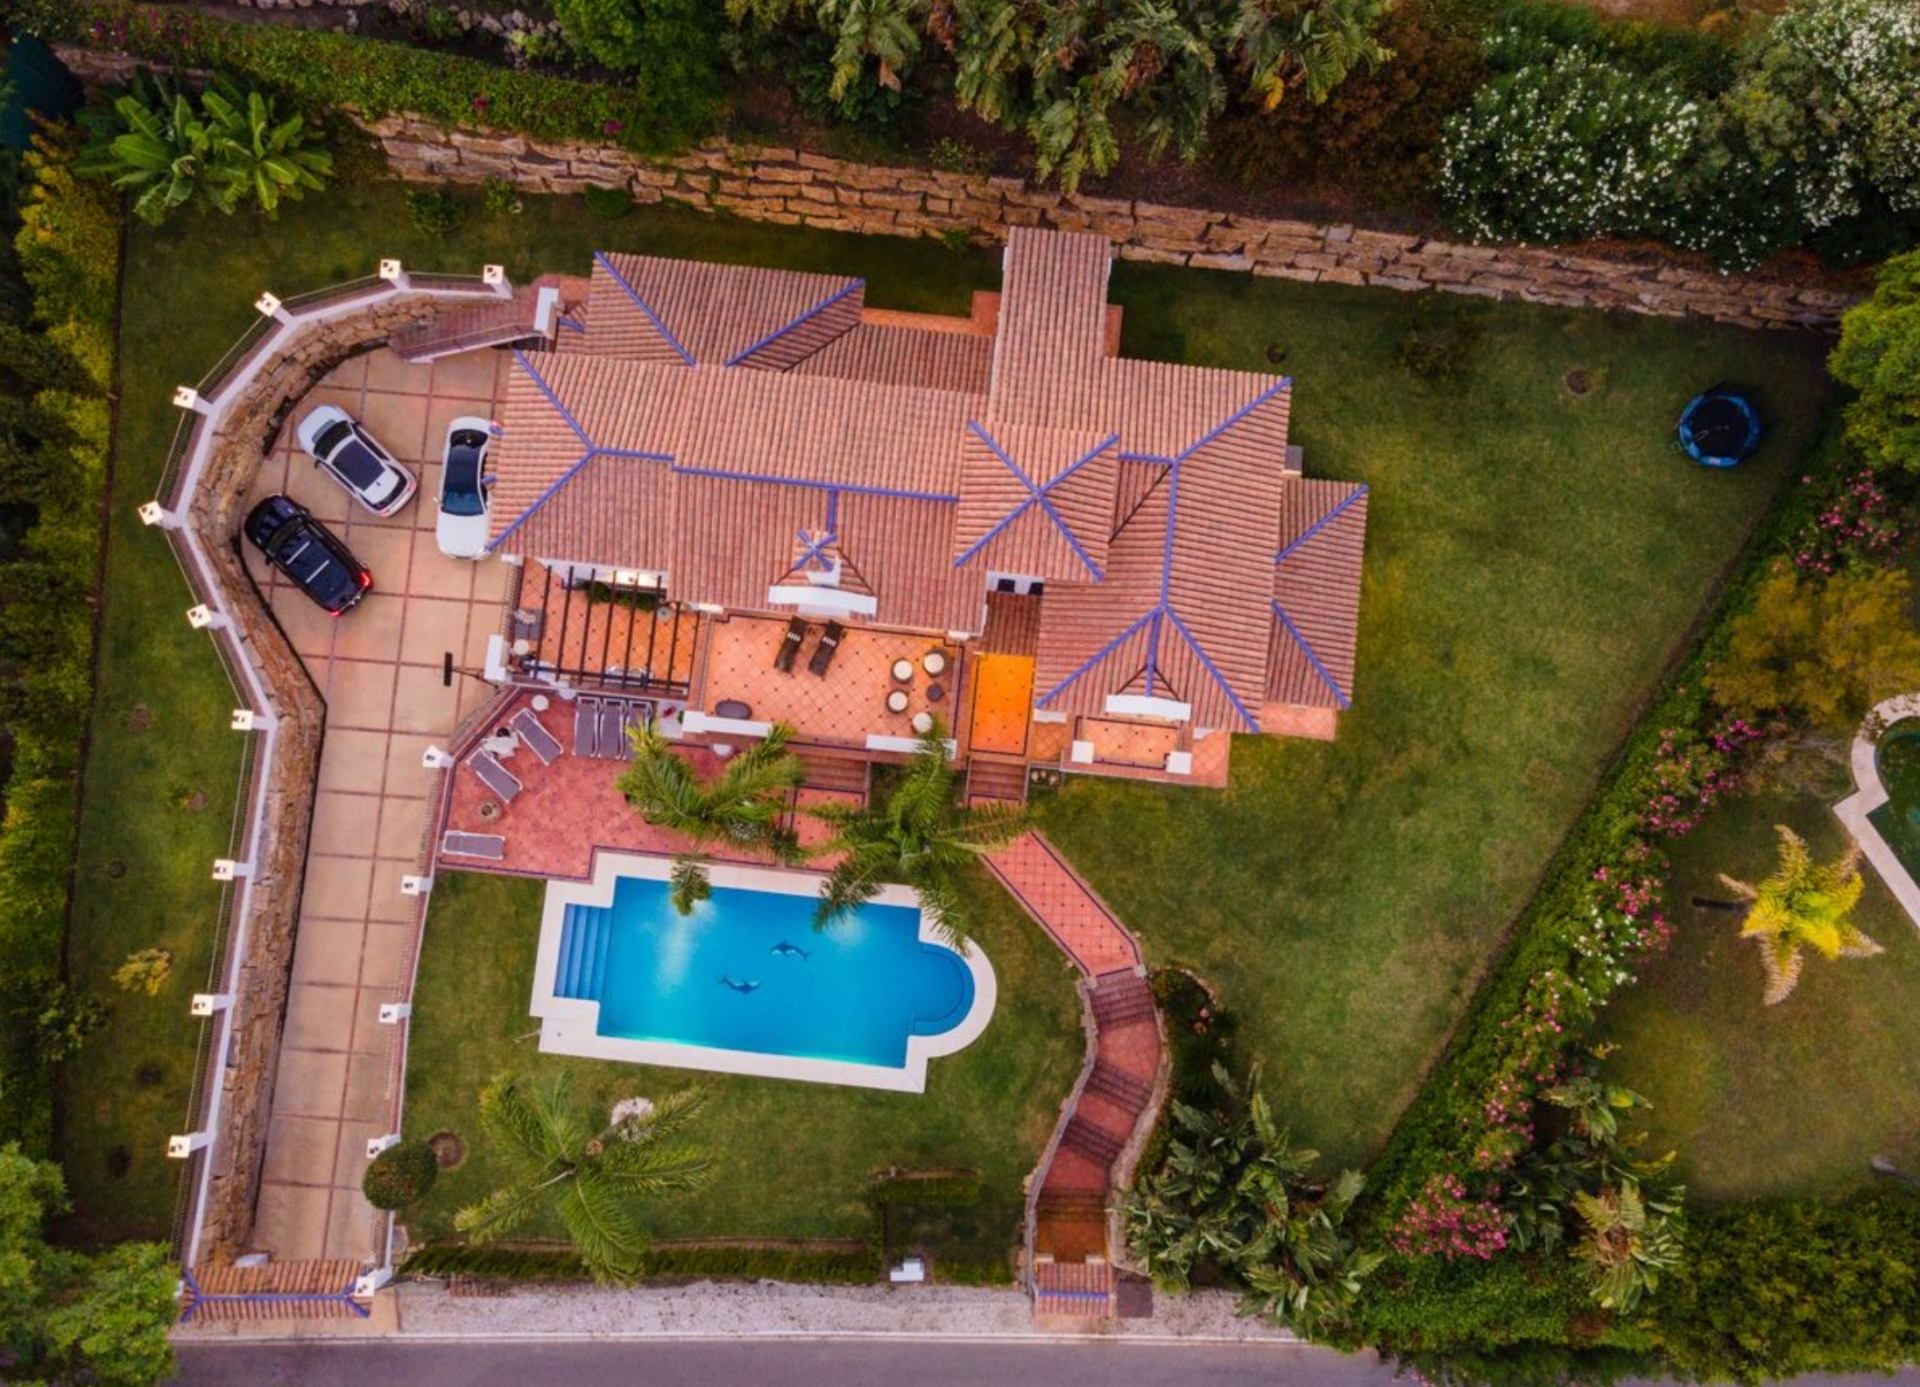 Spectacular villa in the heart of Paraiso Alto distributed over three levels and set on a large 1800m2 plot allowing for ample garden space as well as a large pool